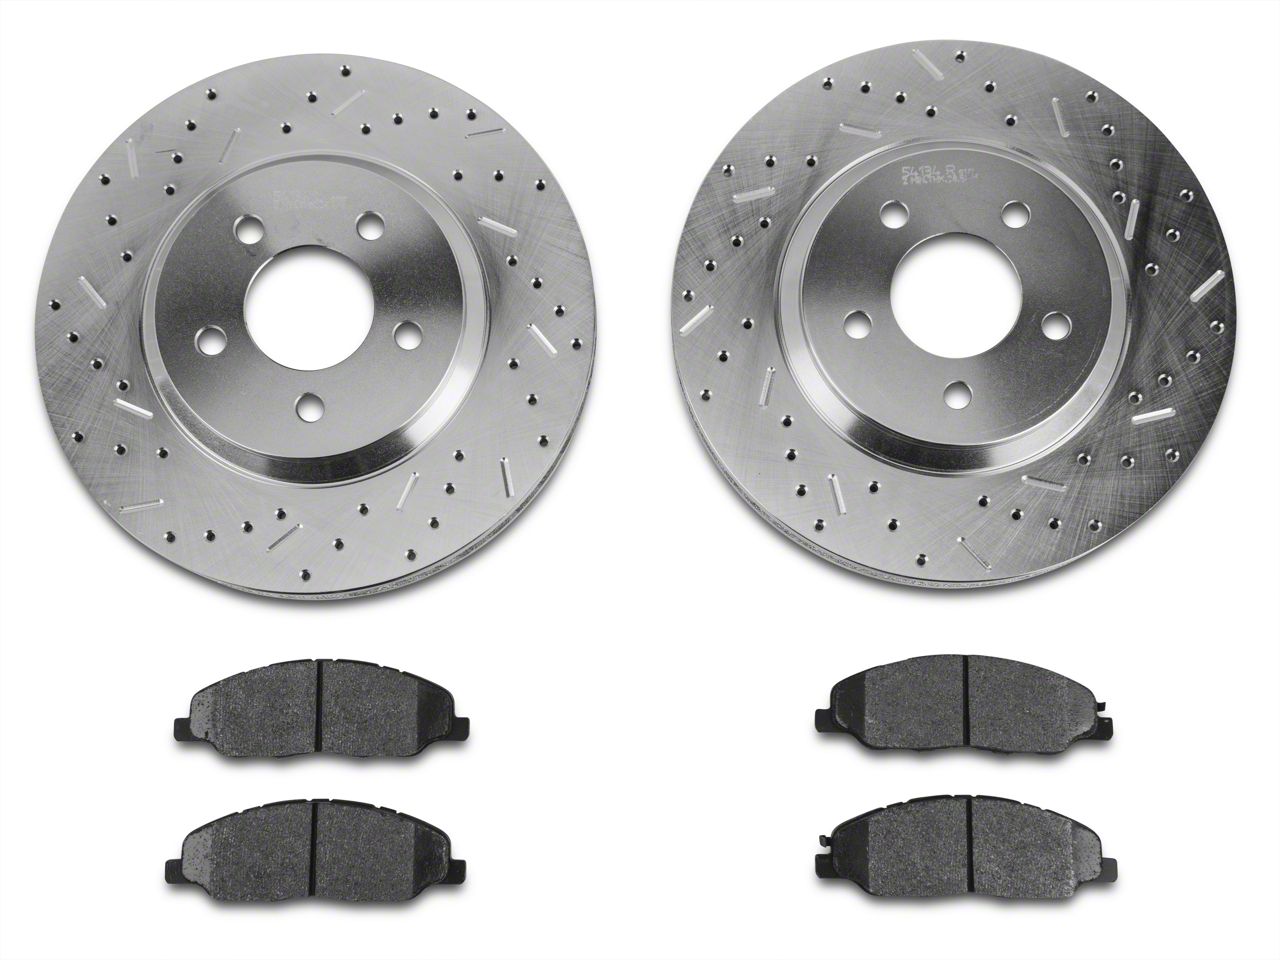 4.6 GT 05-10 EBC Front Brake Kit Discs & Pads for Ford Mustang 5th Generation 